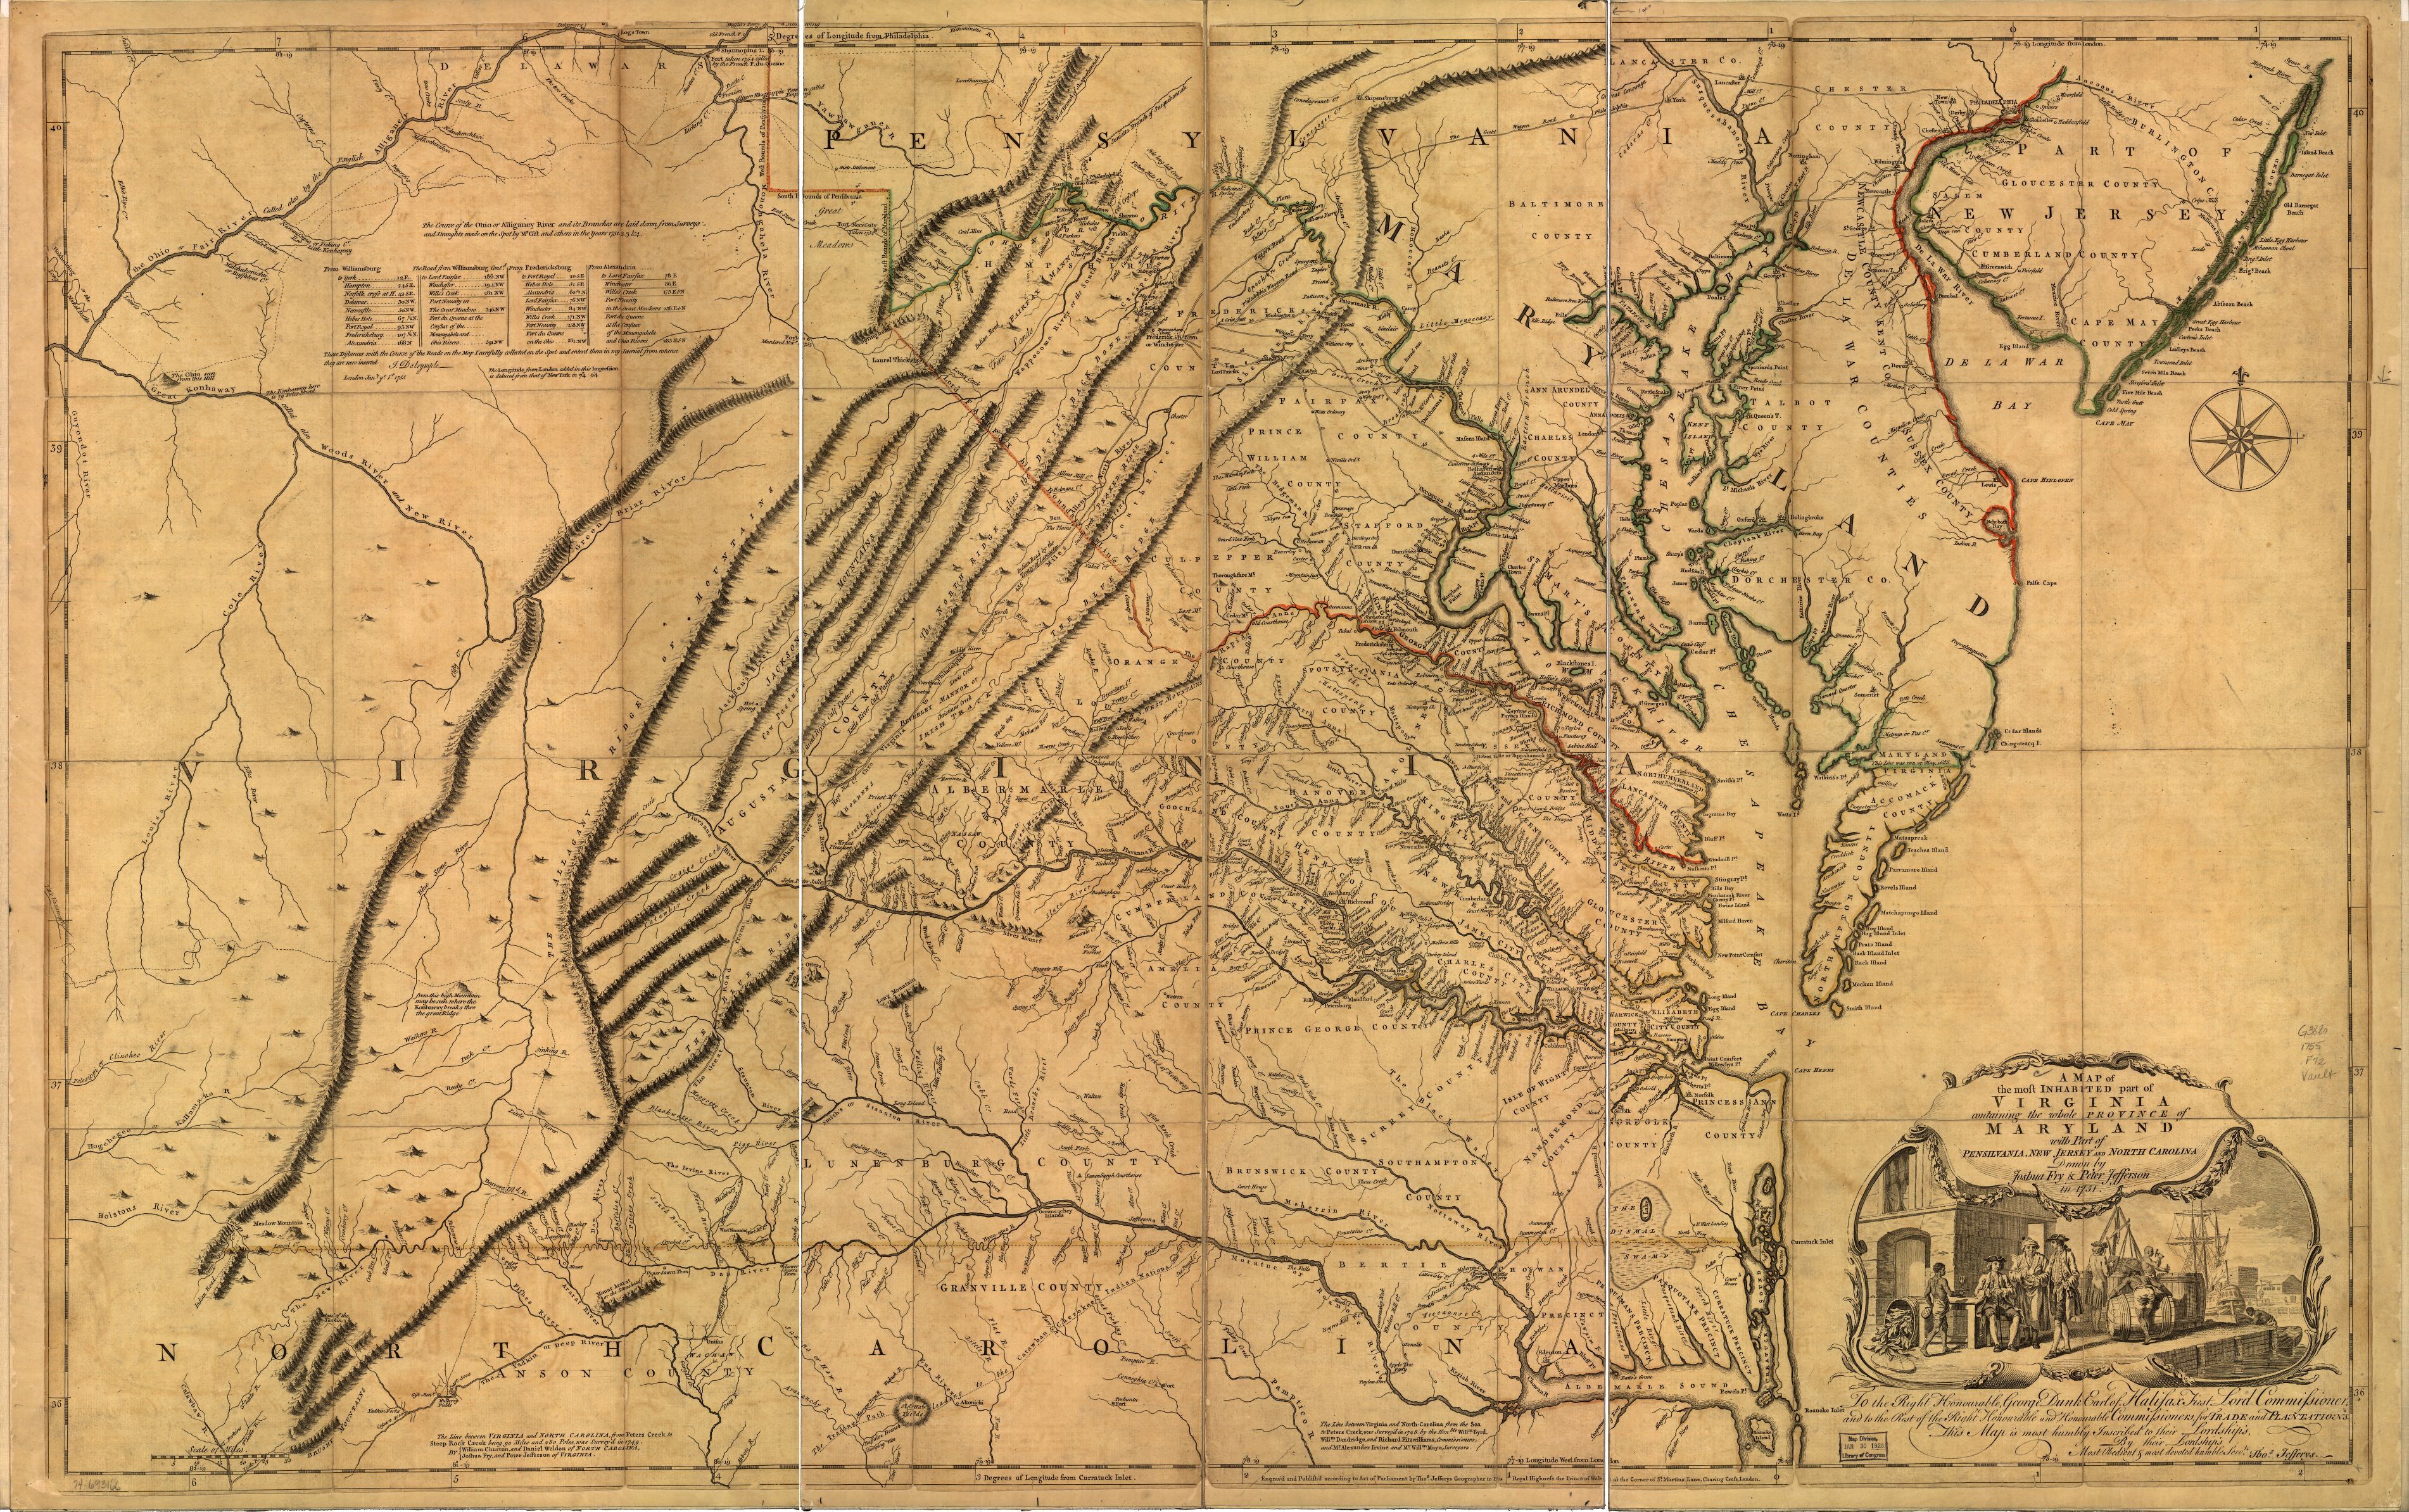 The Fry and Jefferson map of Virginia